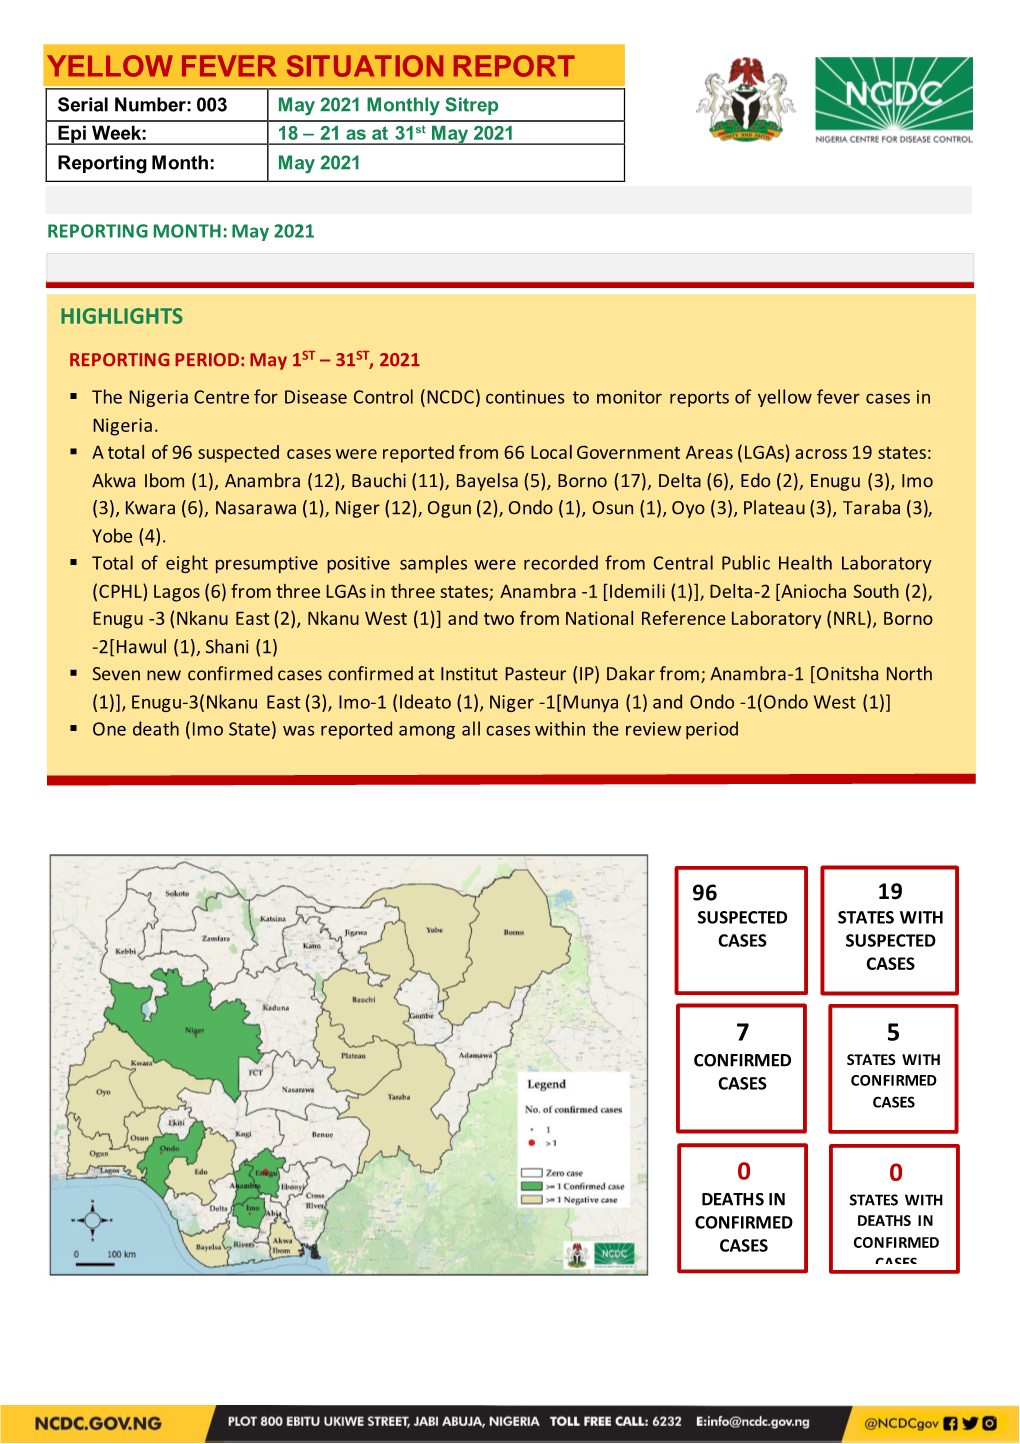 YELLOW FEVER SITUATION REPORT Serial Number: 003 May 2021 Monthly Sitrep Epi Week: 18 – 21 As at 31St May 2021 Reporting Month: May 2021